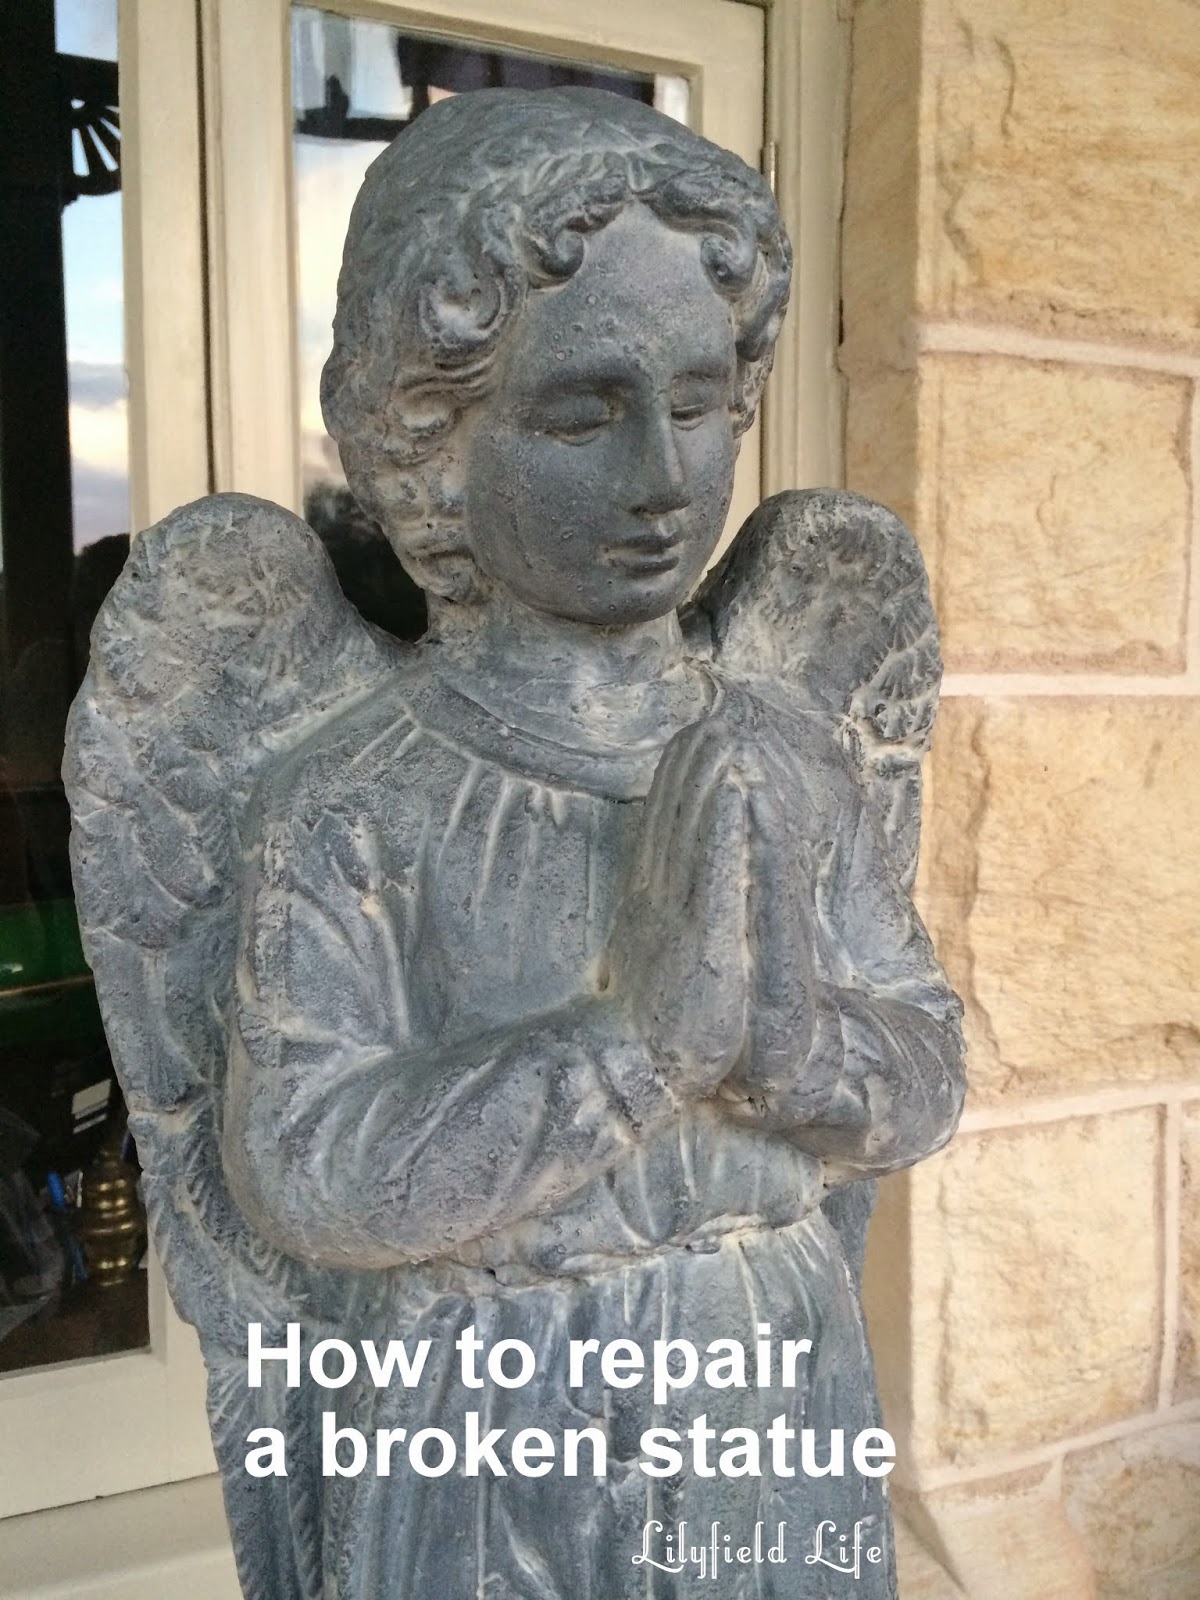 What can be done to repair a broken sculpture?